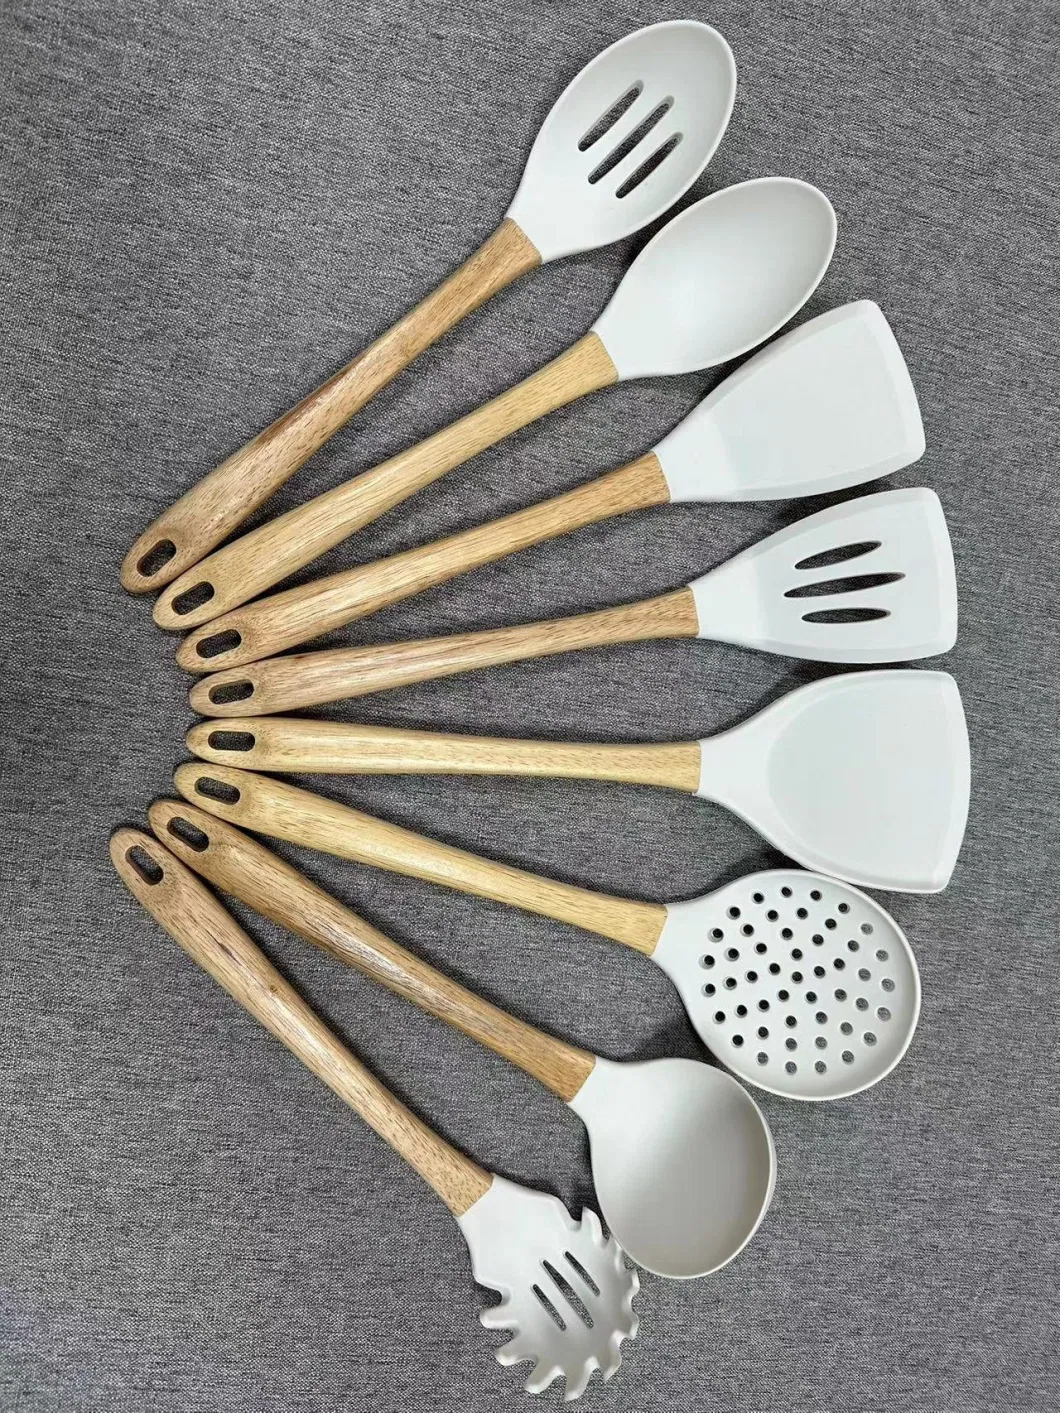 8PC Wood Handle High Temperature Silicone Kitchen Tool Cooking Utensils Set